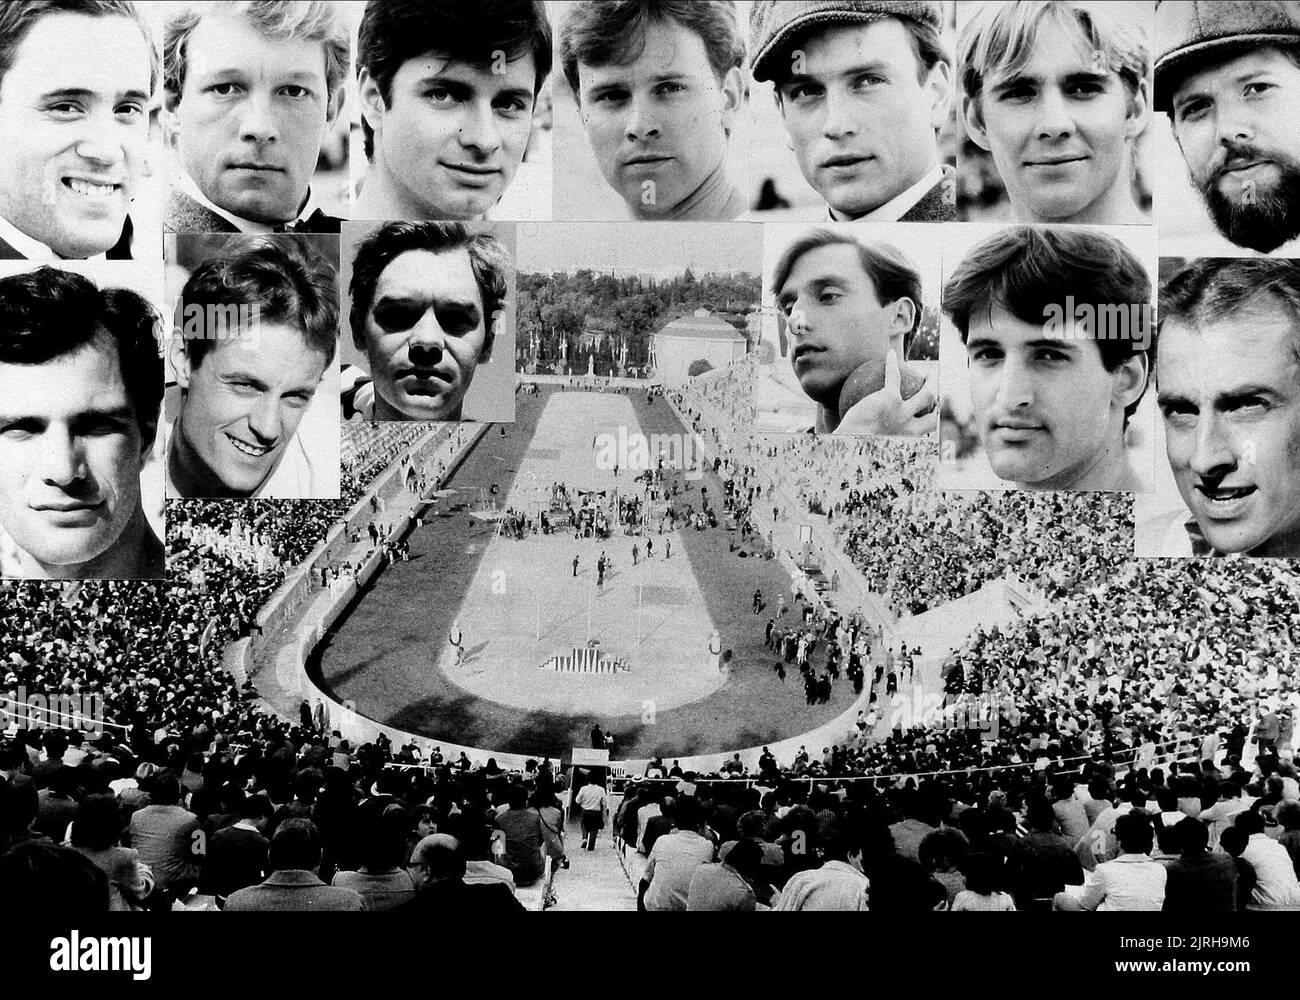 MORTON,GILLIAM,HYDE-WHITE,COBB,CONDER,CONNERY,MERRILL,SWARTZ,FREWER,CARUSO,BLOCK,EDWARDS,ARMSTRONG, THE FIRST OLYMPICS: ATHENS 1896, 1984 Stock Photo